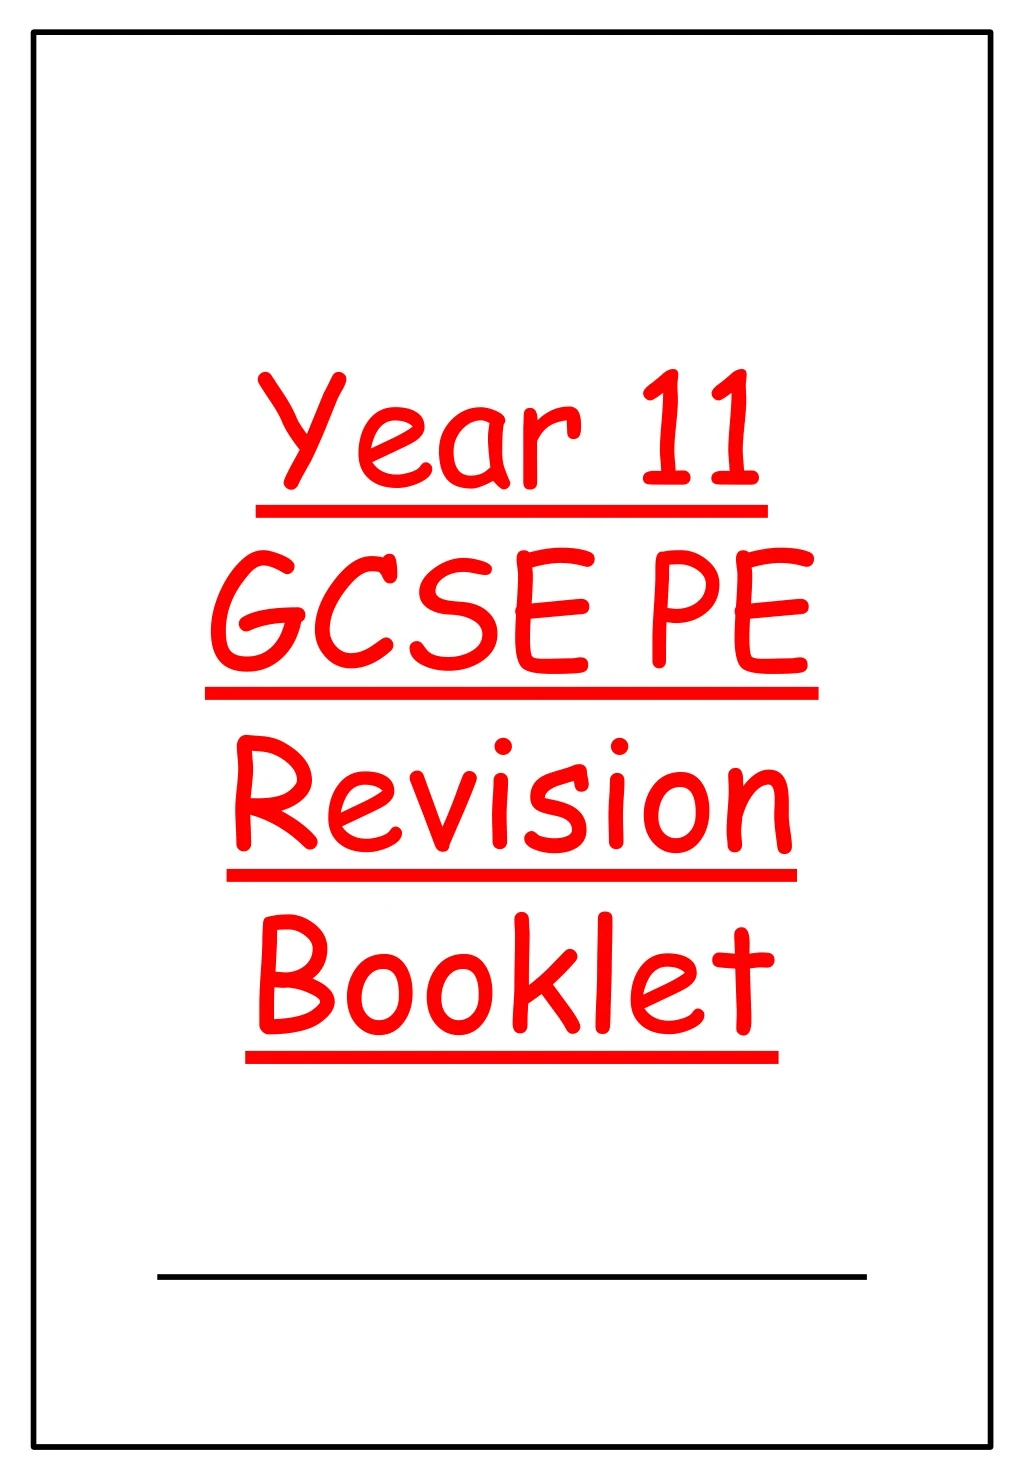 year 11 gcse pe revision booklet